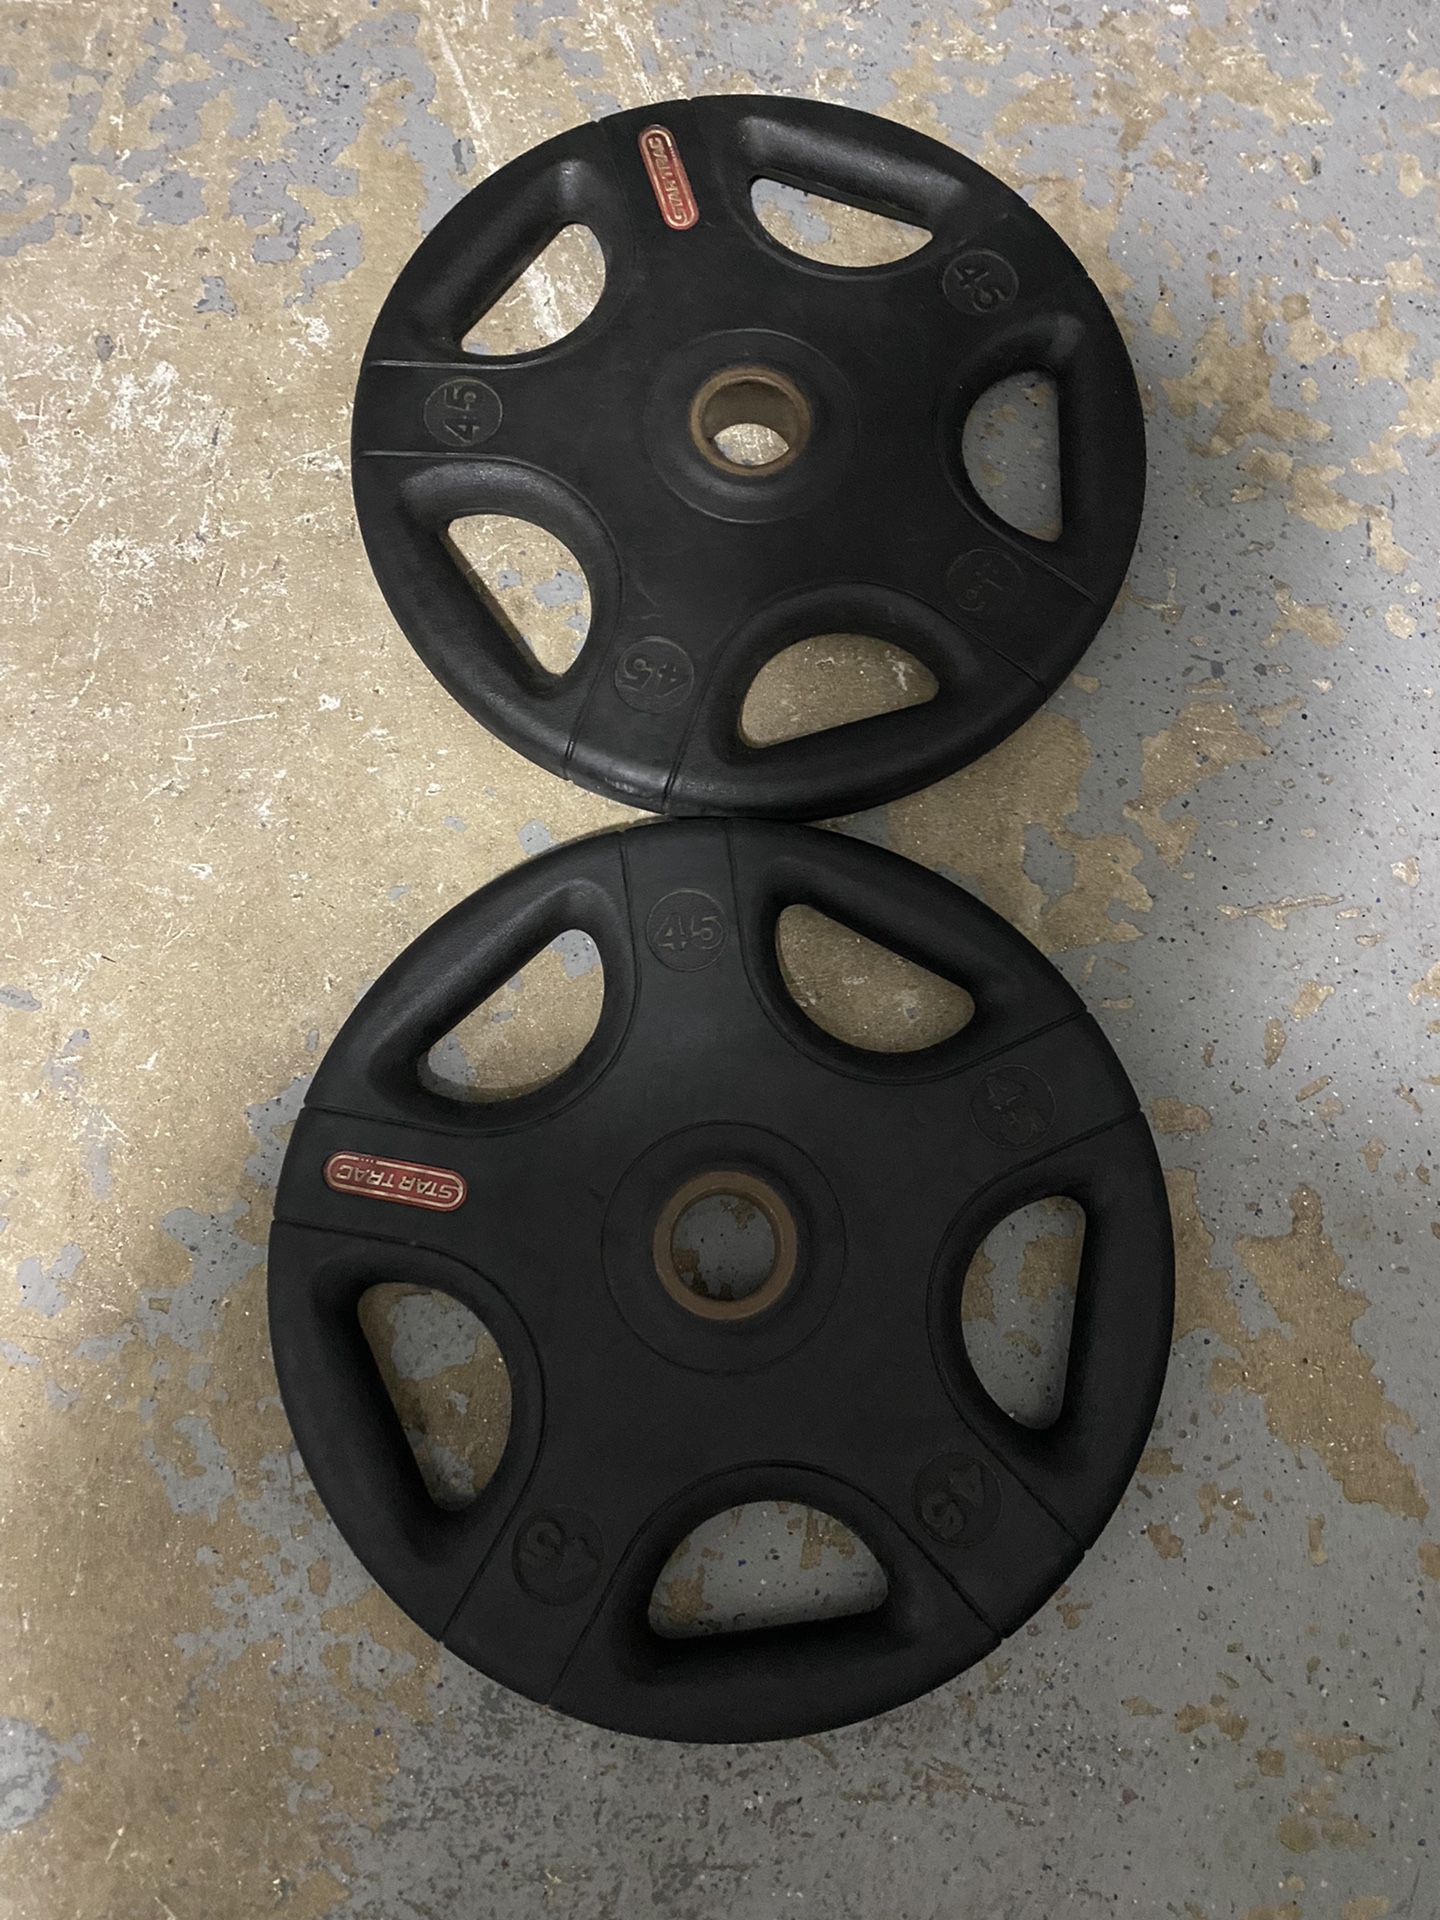 OLYMPIC STAR TRAC PAIR 45LBS WEIGHTS 